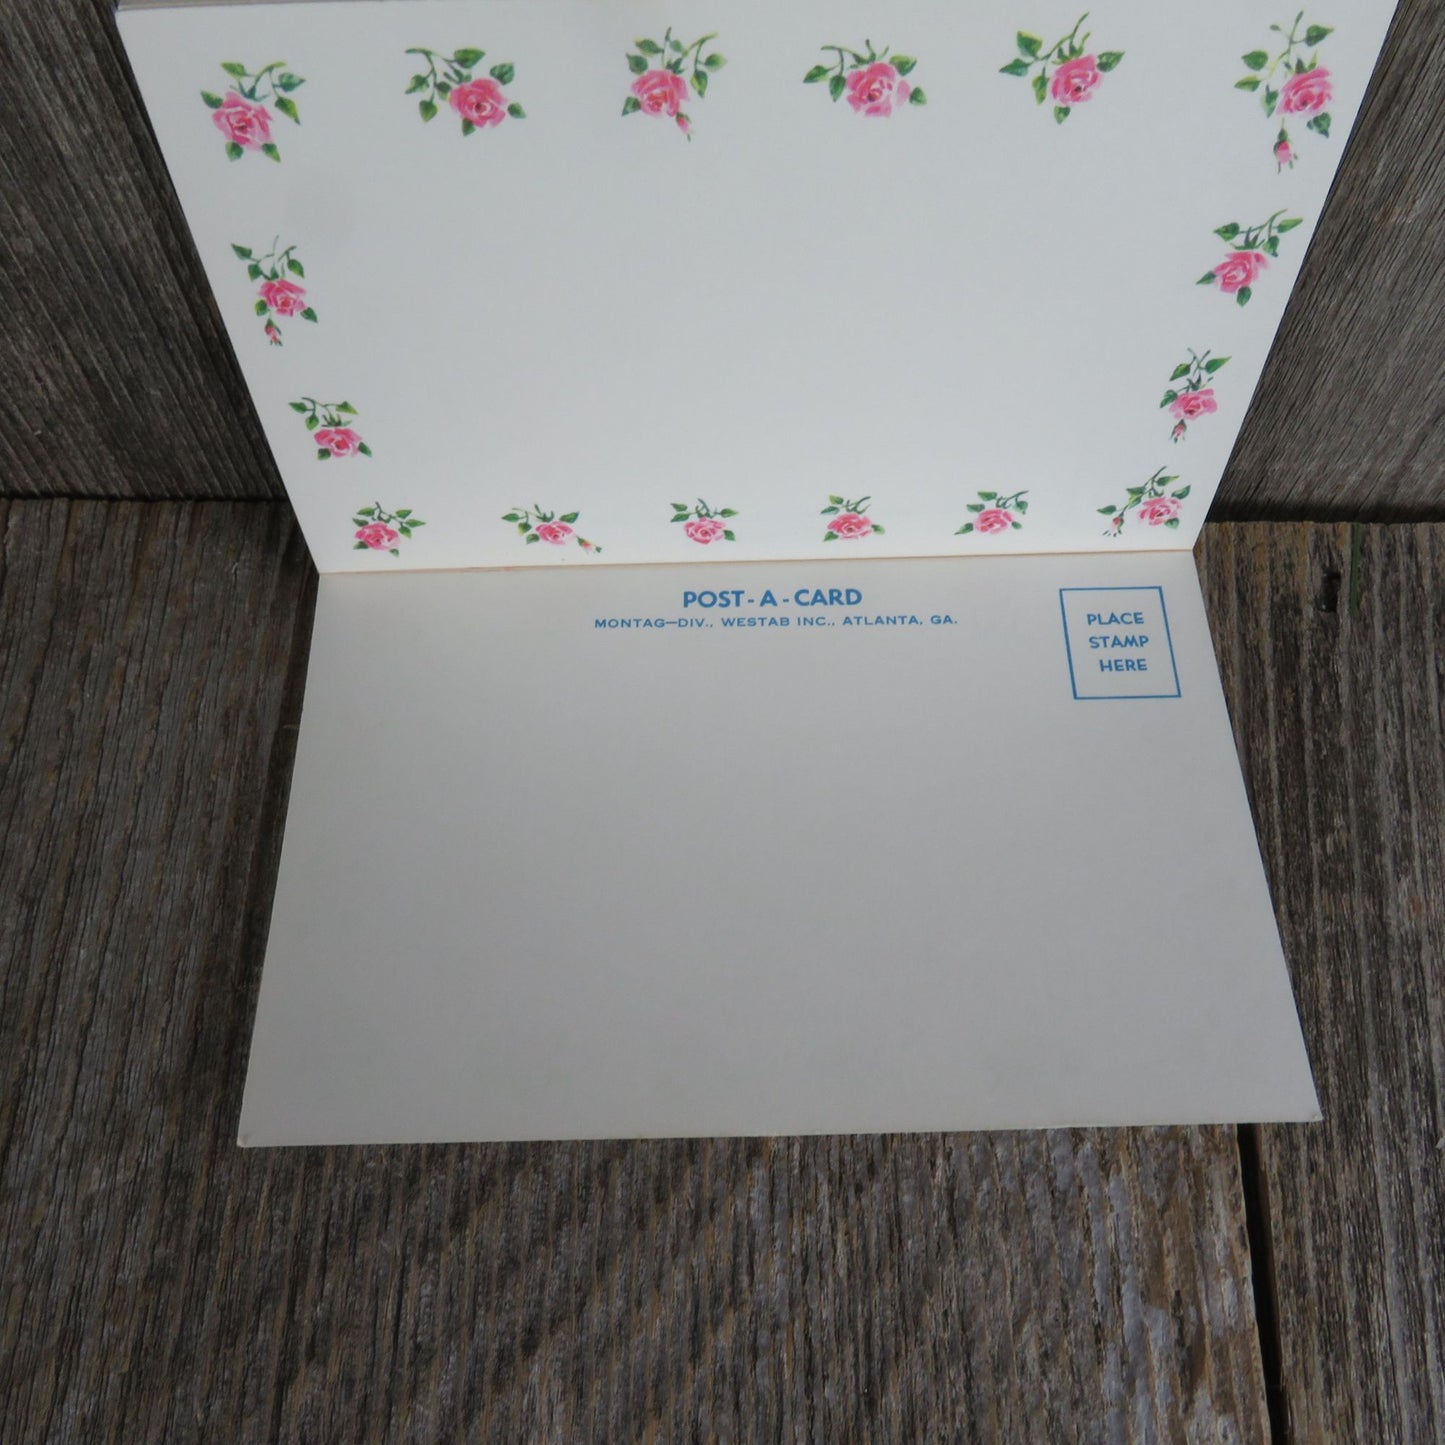 Vintage Blank Note Cards Post A Card Book Montag Thank You Flowers Floral Postcard